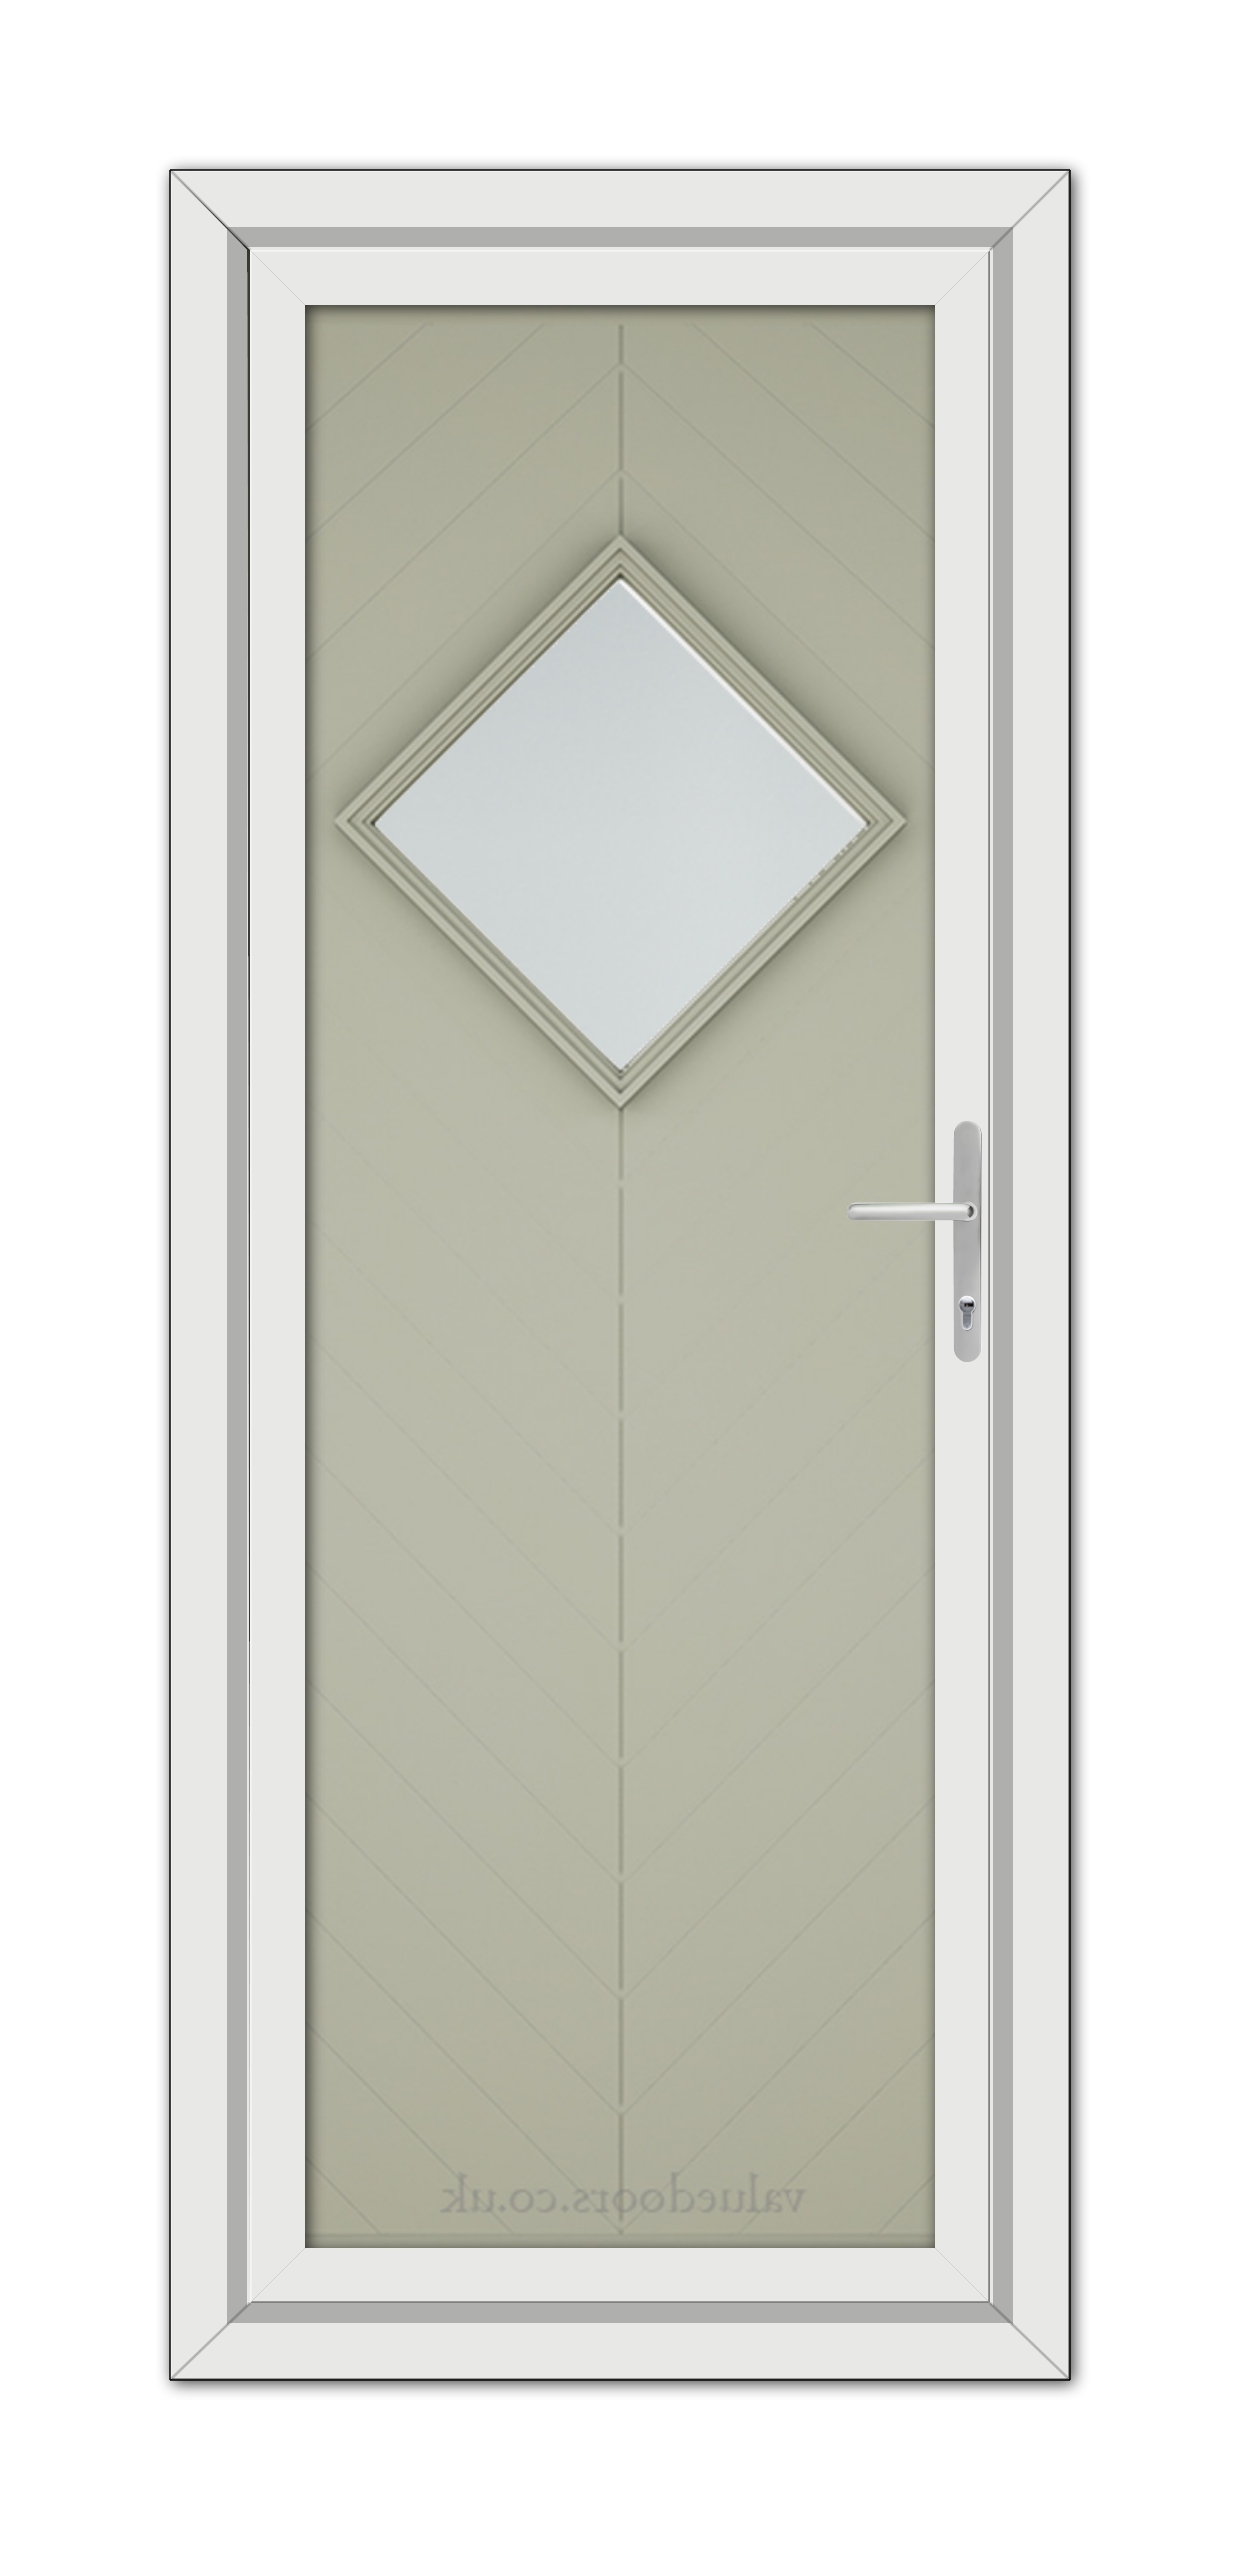 An Agate Grey Hamburg uPVC door with a diamond-shaped window and white frame, featuring a silver handle on the right side.